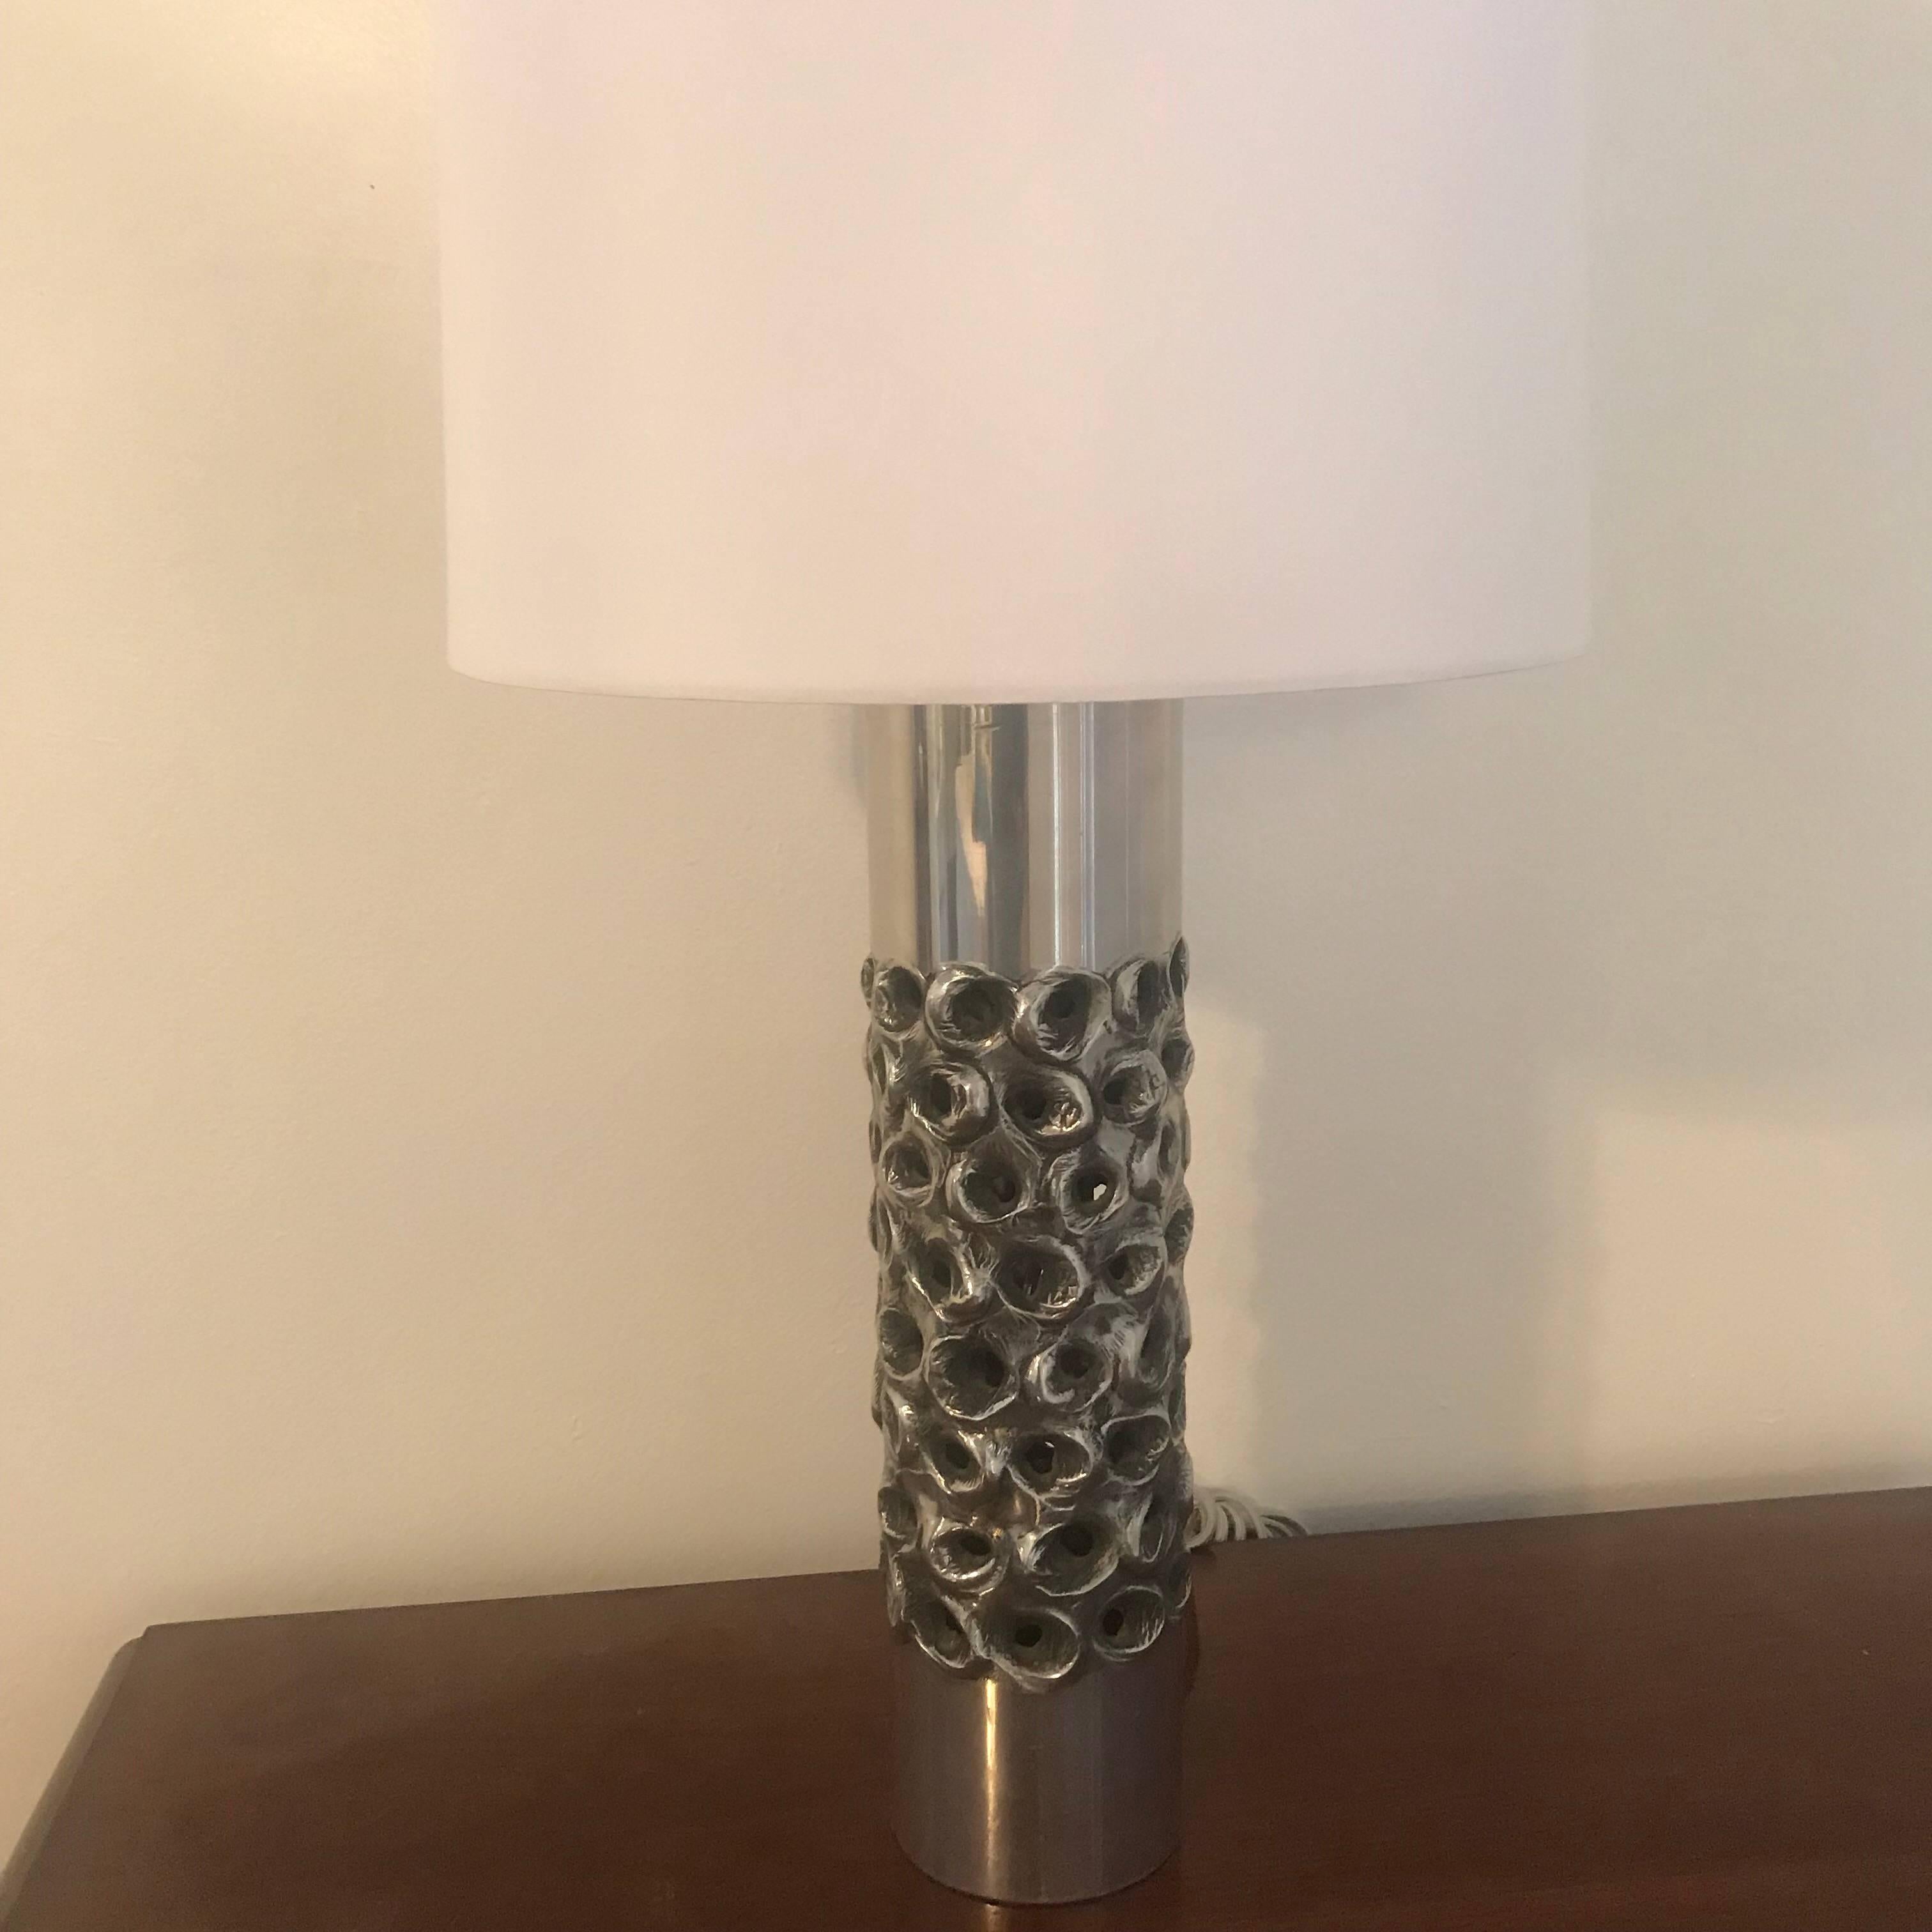 A wonderful Belgian sculptural 1970s chrome table lamp designed by W. Luyckx for Aluclair. Newly Rewired with a silver cloth cord and matching socket. A modern hand tucked silk shade included. Located in our New York City Chelsea location.